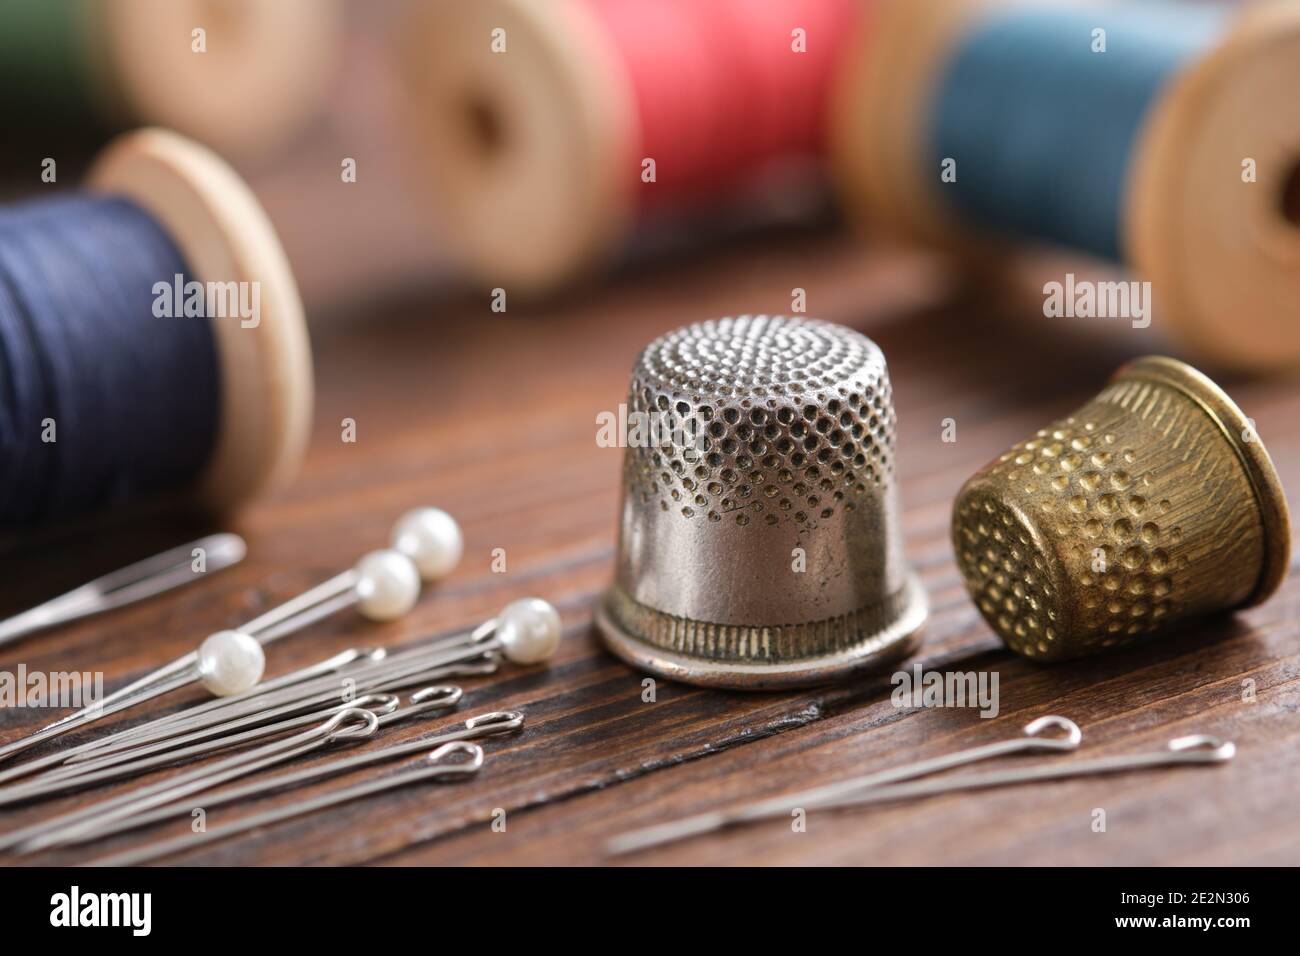 Two thimbles and including pins. Various wooden spools of multicolored threads on background. Stock Photo